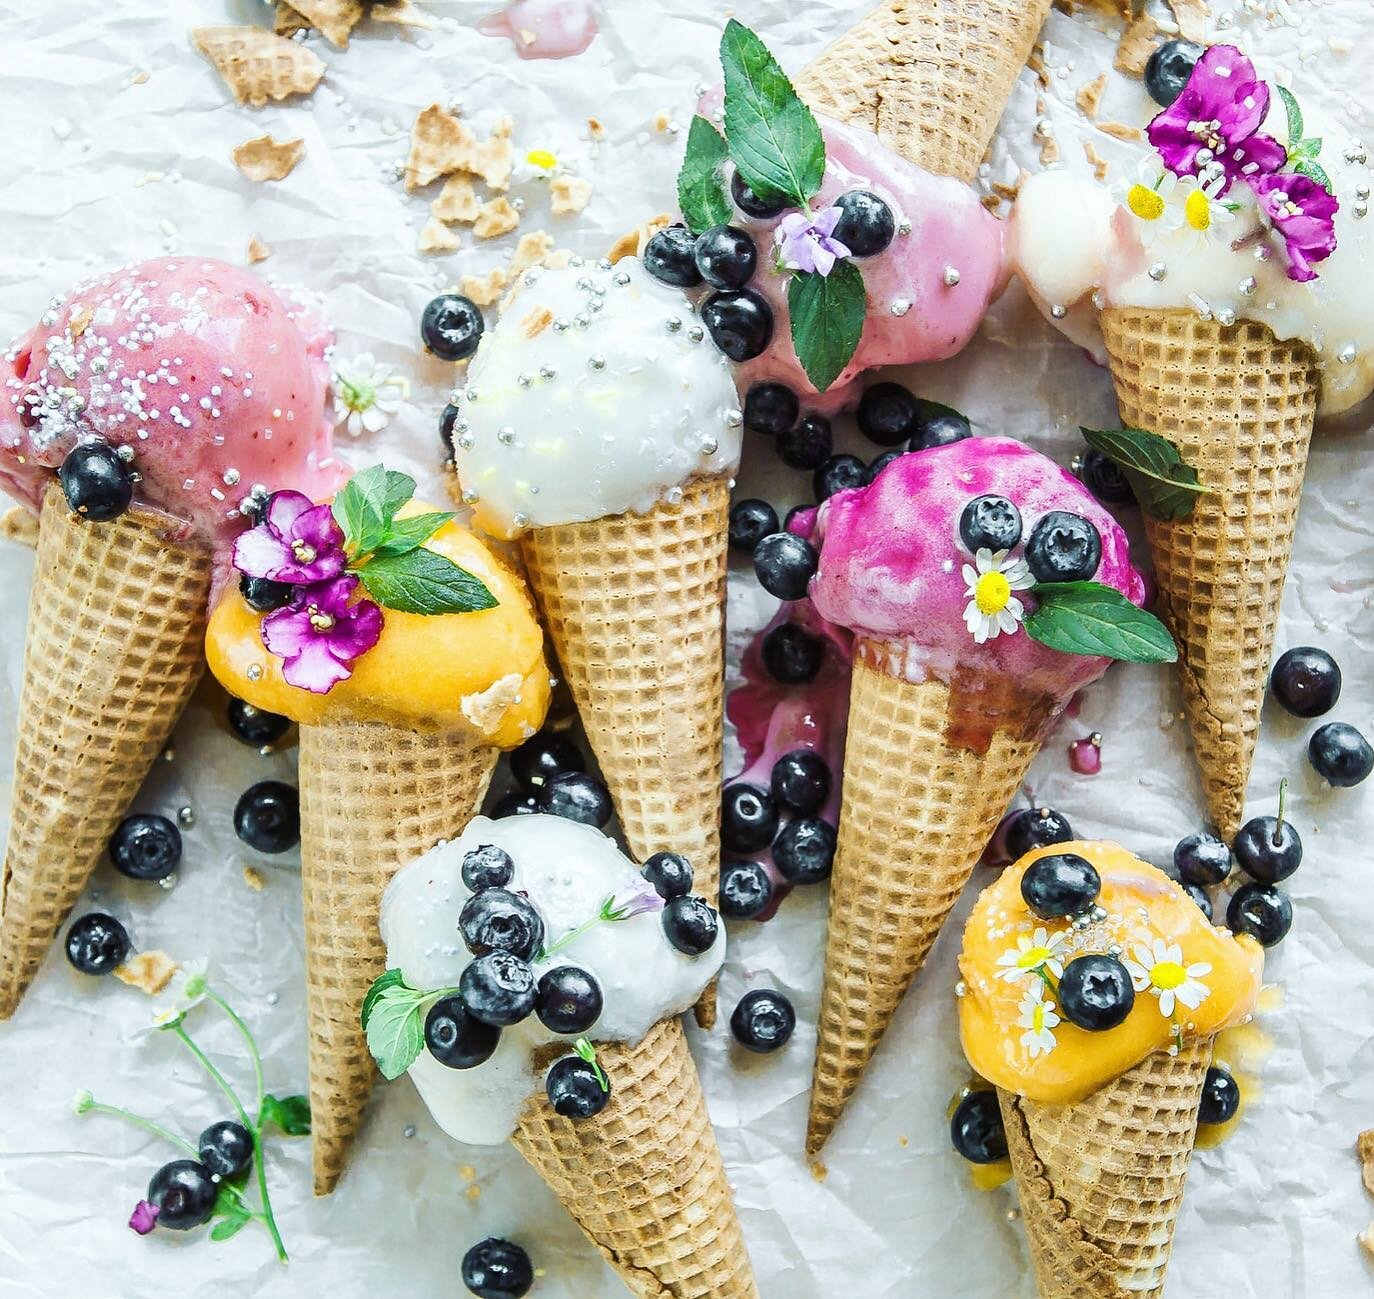 Happy National Ice Cream Day! Did you know that the refrigerator/freezer is one of the important items that Safe Nest Home Watch checks during weekly home inspections? Whether you&rsquo;re gone for an extended length of time or just a quick vacation,